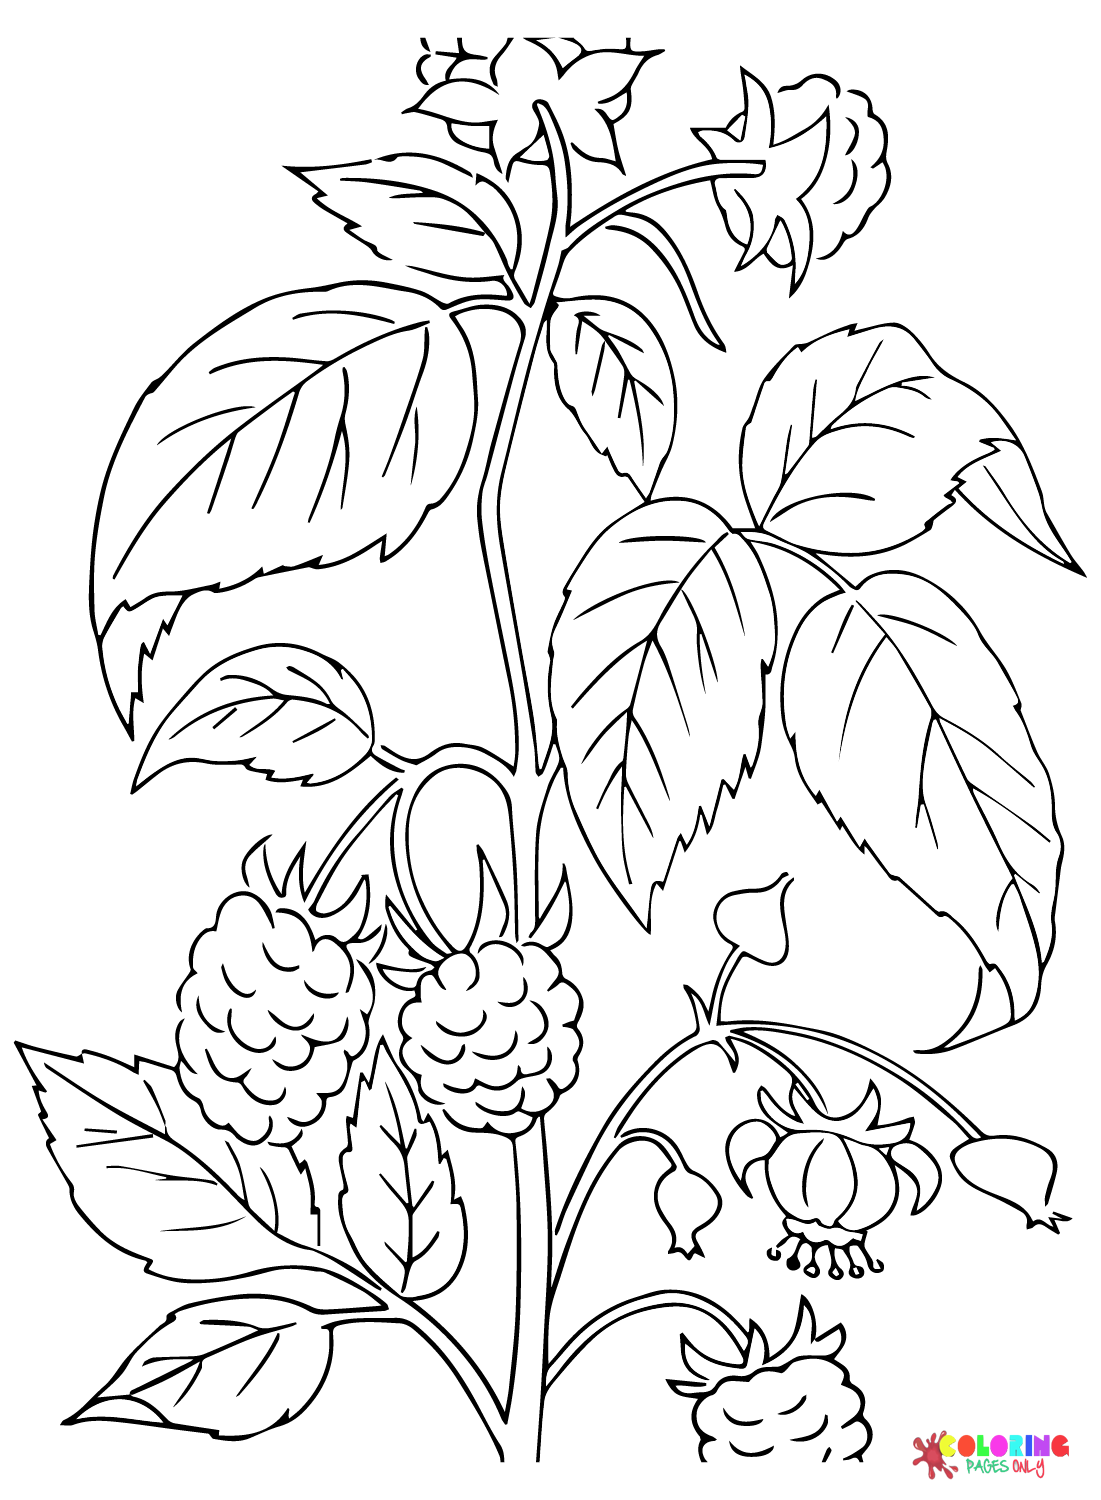 Blackberry Tree Coloring Page